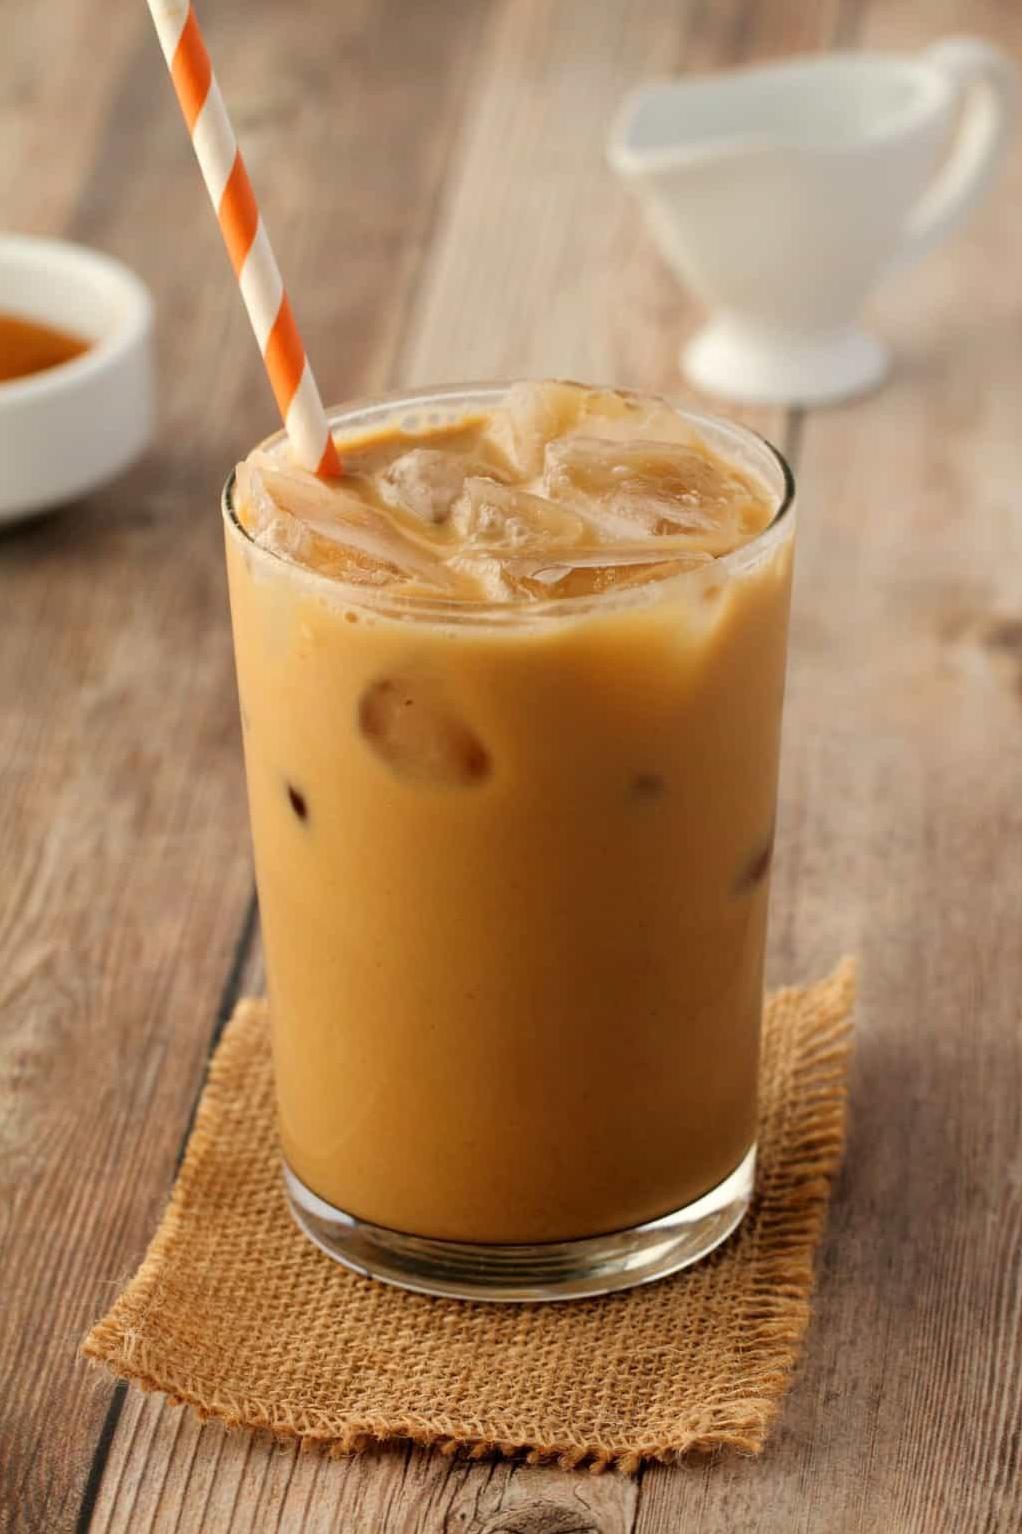  Chilled, smooth, and satisfying - this Iced Coffee Shake is the perfect summertime treat.